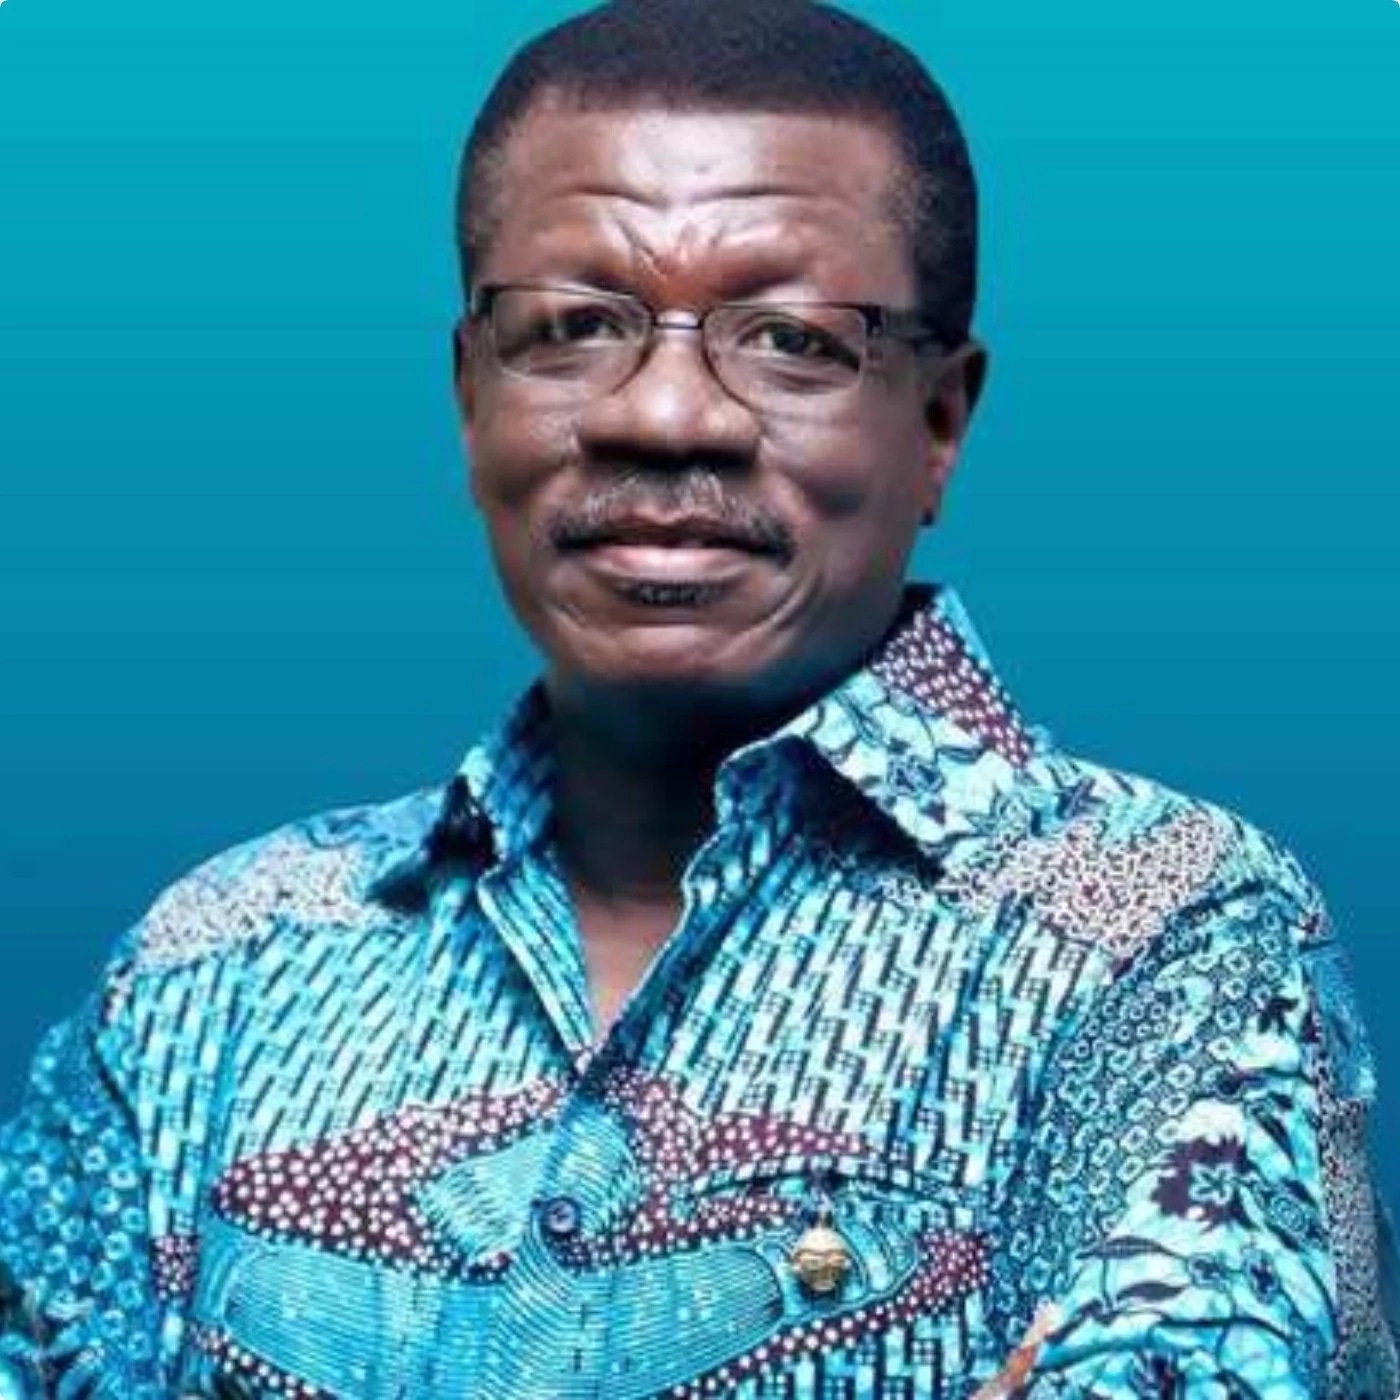 Mensa Otabil is now a grandpa! Changes facial looks to fit the title